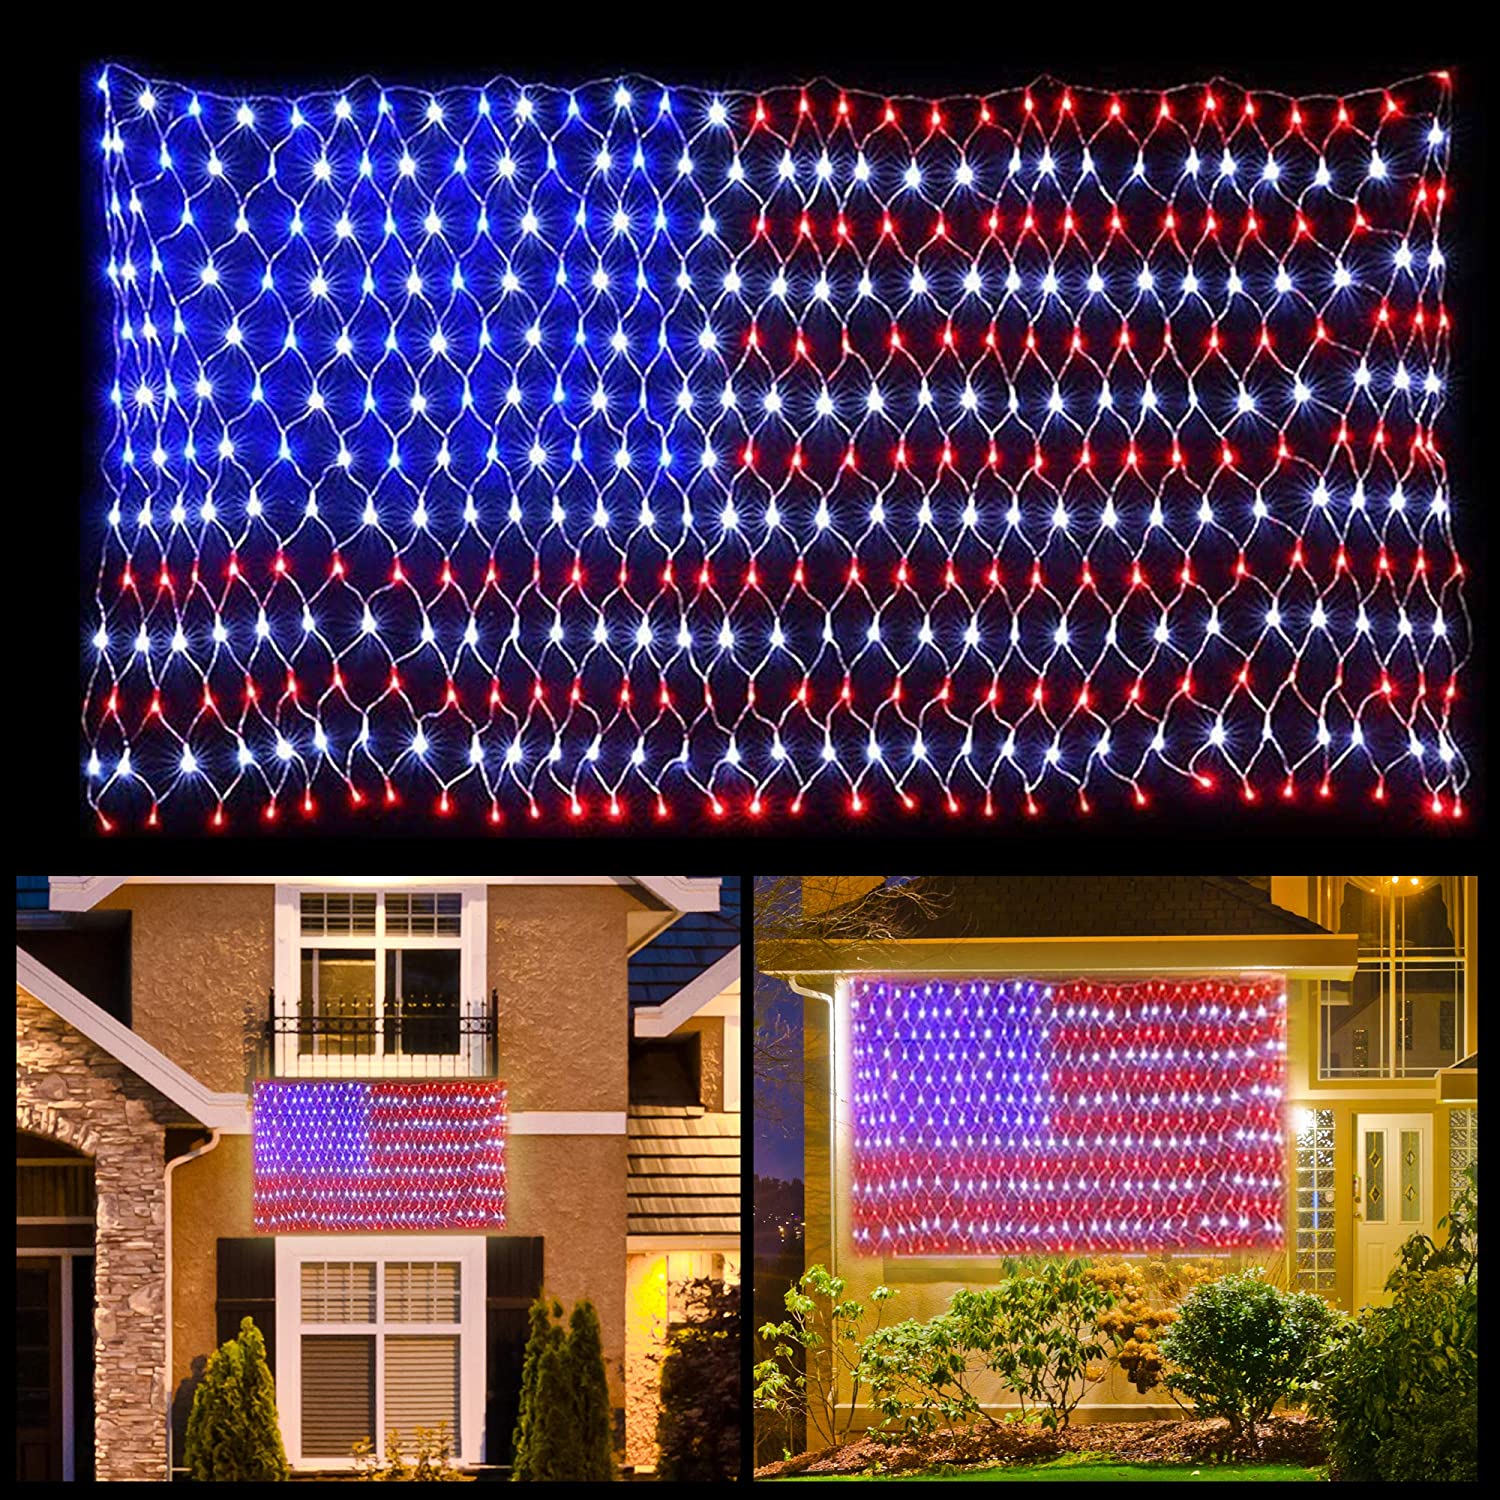 6.5ft3.3ft 420LED American Flag Net Lights String Light Waterproof for Christmas, Holiday, Independence Day, Memorial Day, Decoration, Garden, Yard, Indoor Outdoor - image 1 of 3